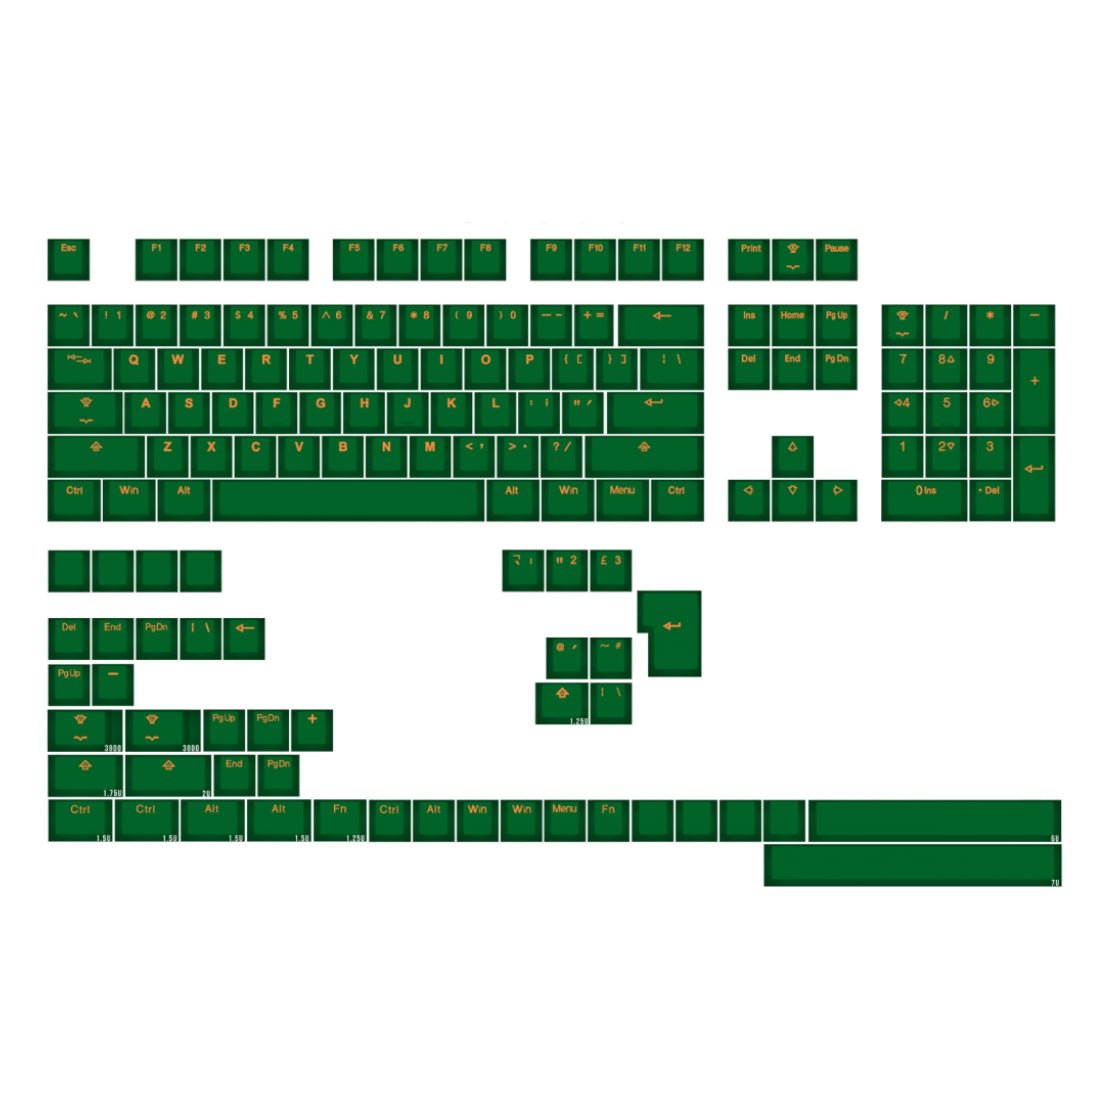 Tai-Hao ABS 149 Keys Cubic Double Shot Backlit Keycaps - Green - مفاتيح - Store 974 | ستور ٩٧٤